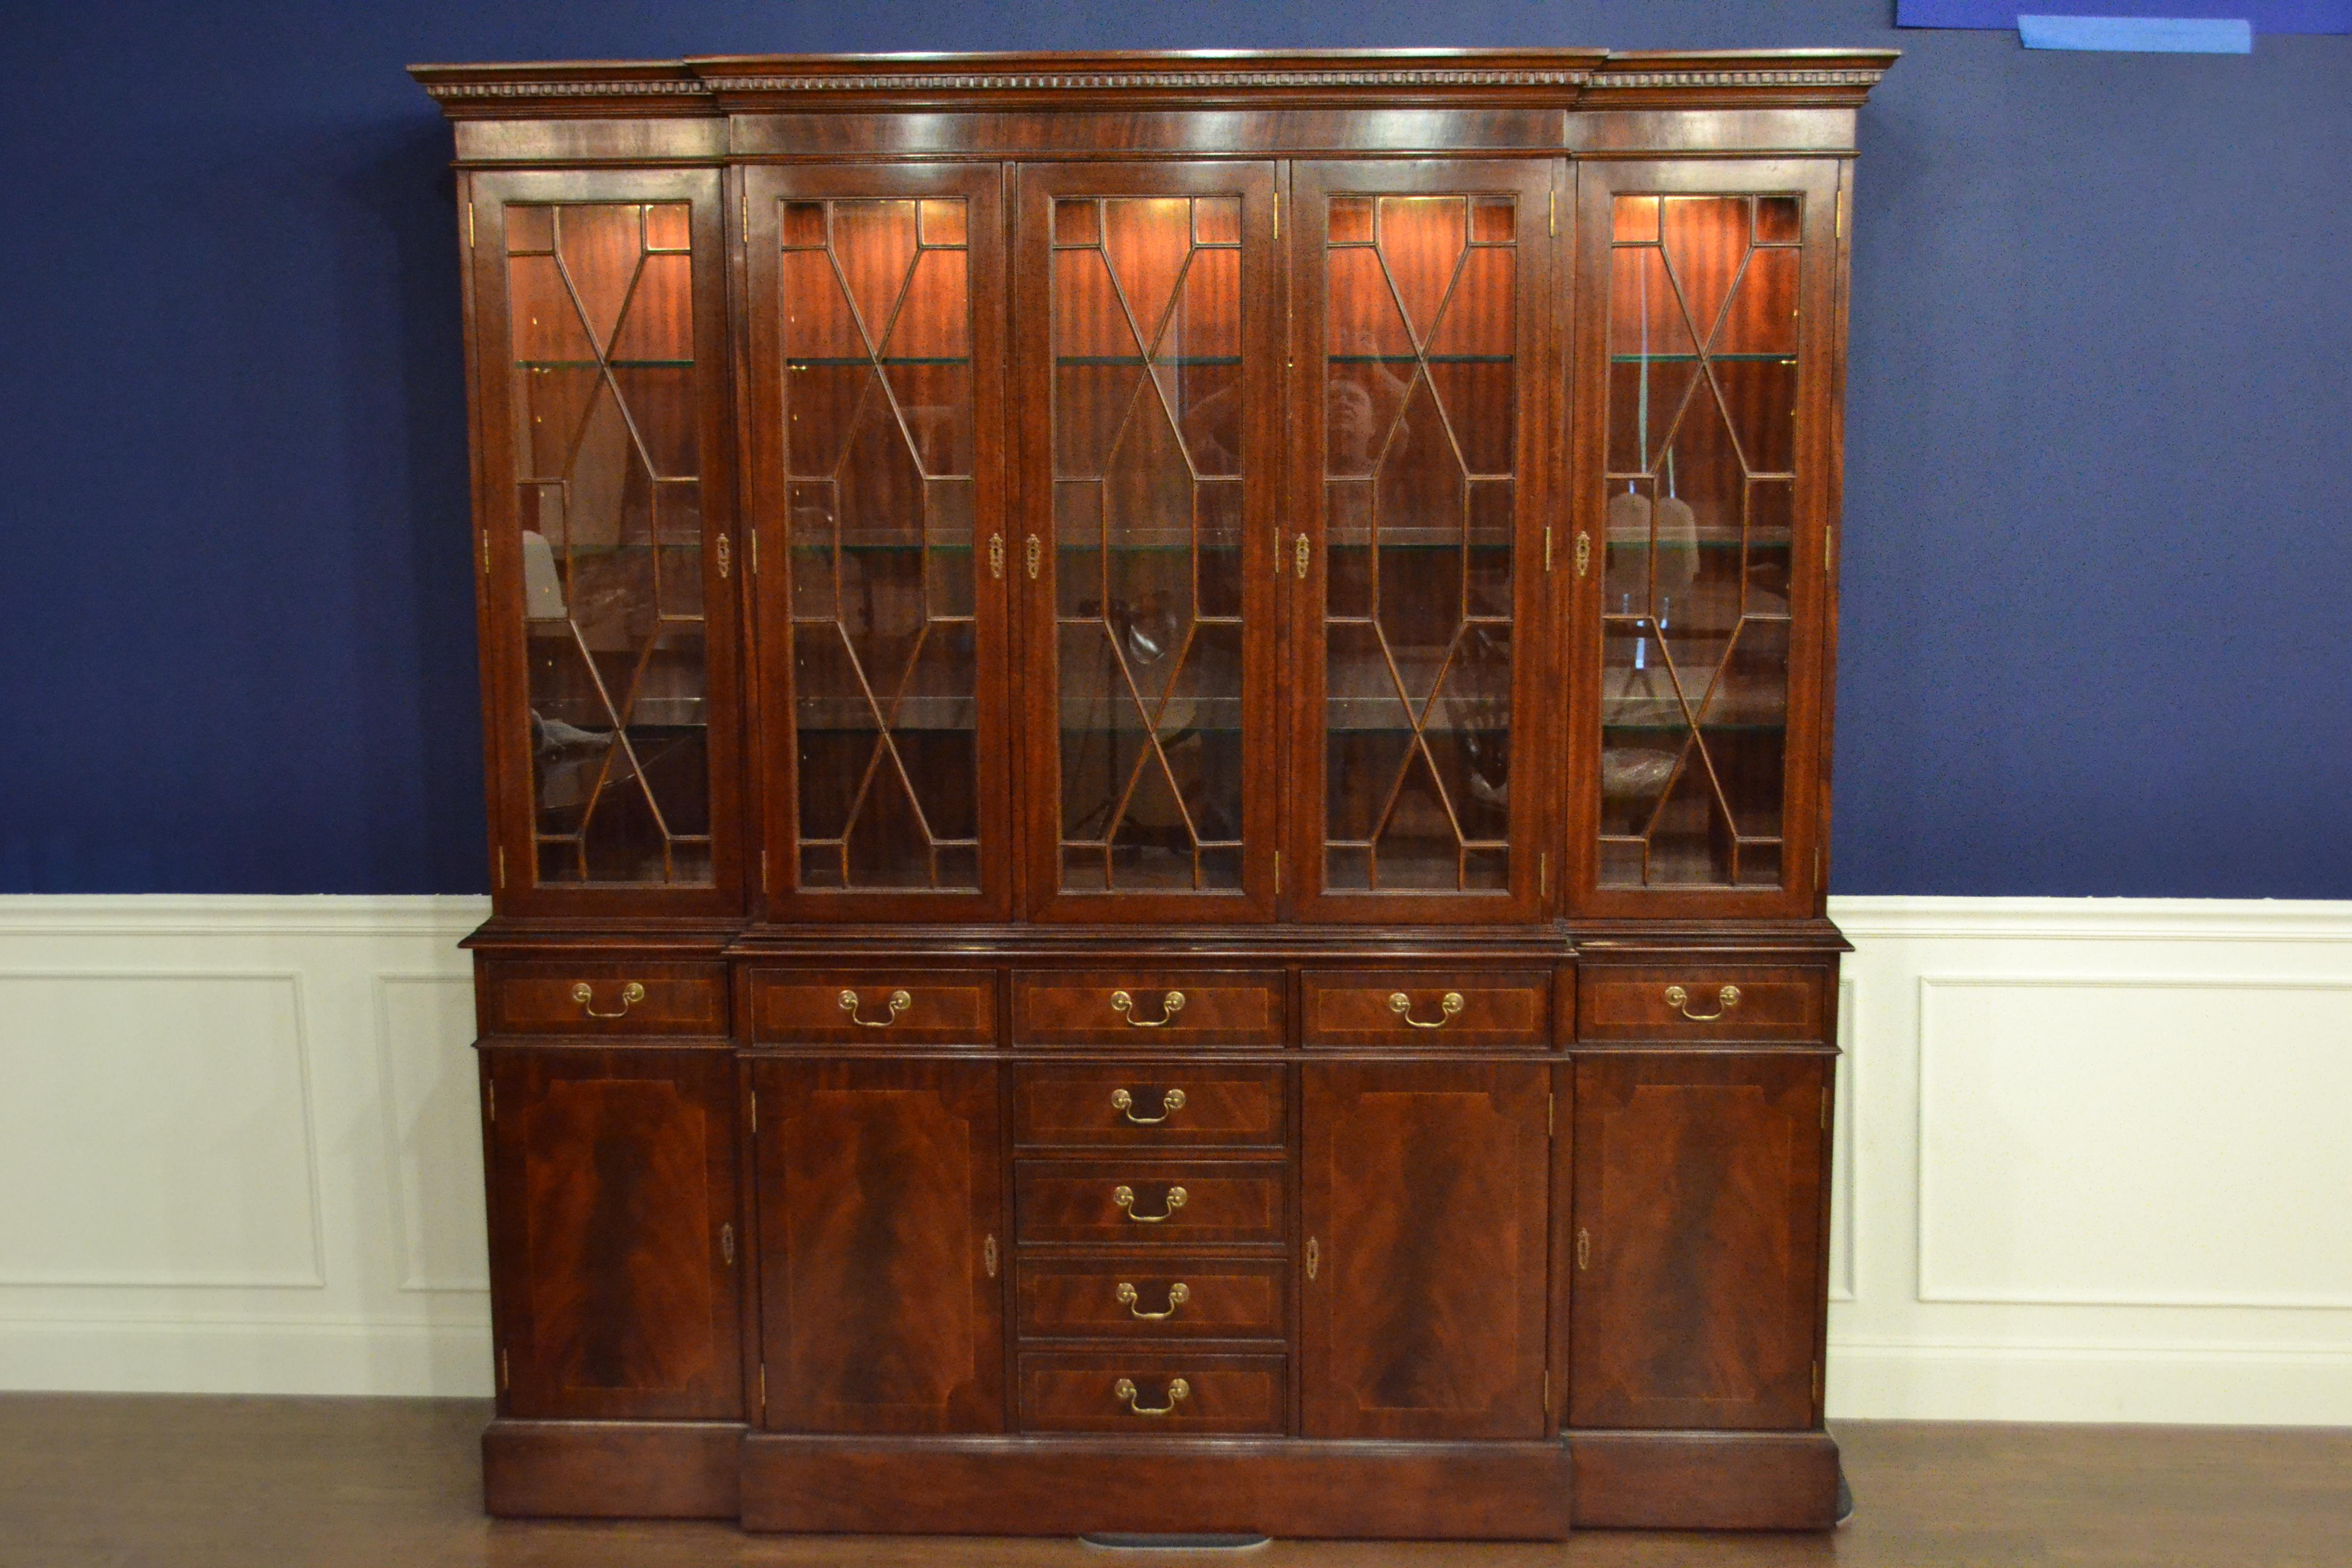 This is the ultimate large traditional mahogany breakfront bookcase or china cabinet with five doors by Leighton Hall. It features four bottom doors and nine drawers with swirly crotch mahogany fields and straight grain mahogany borders. The top